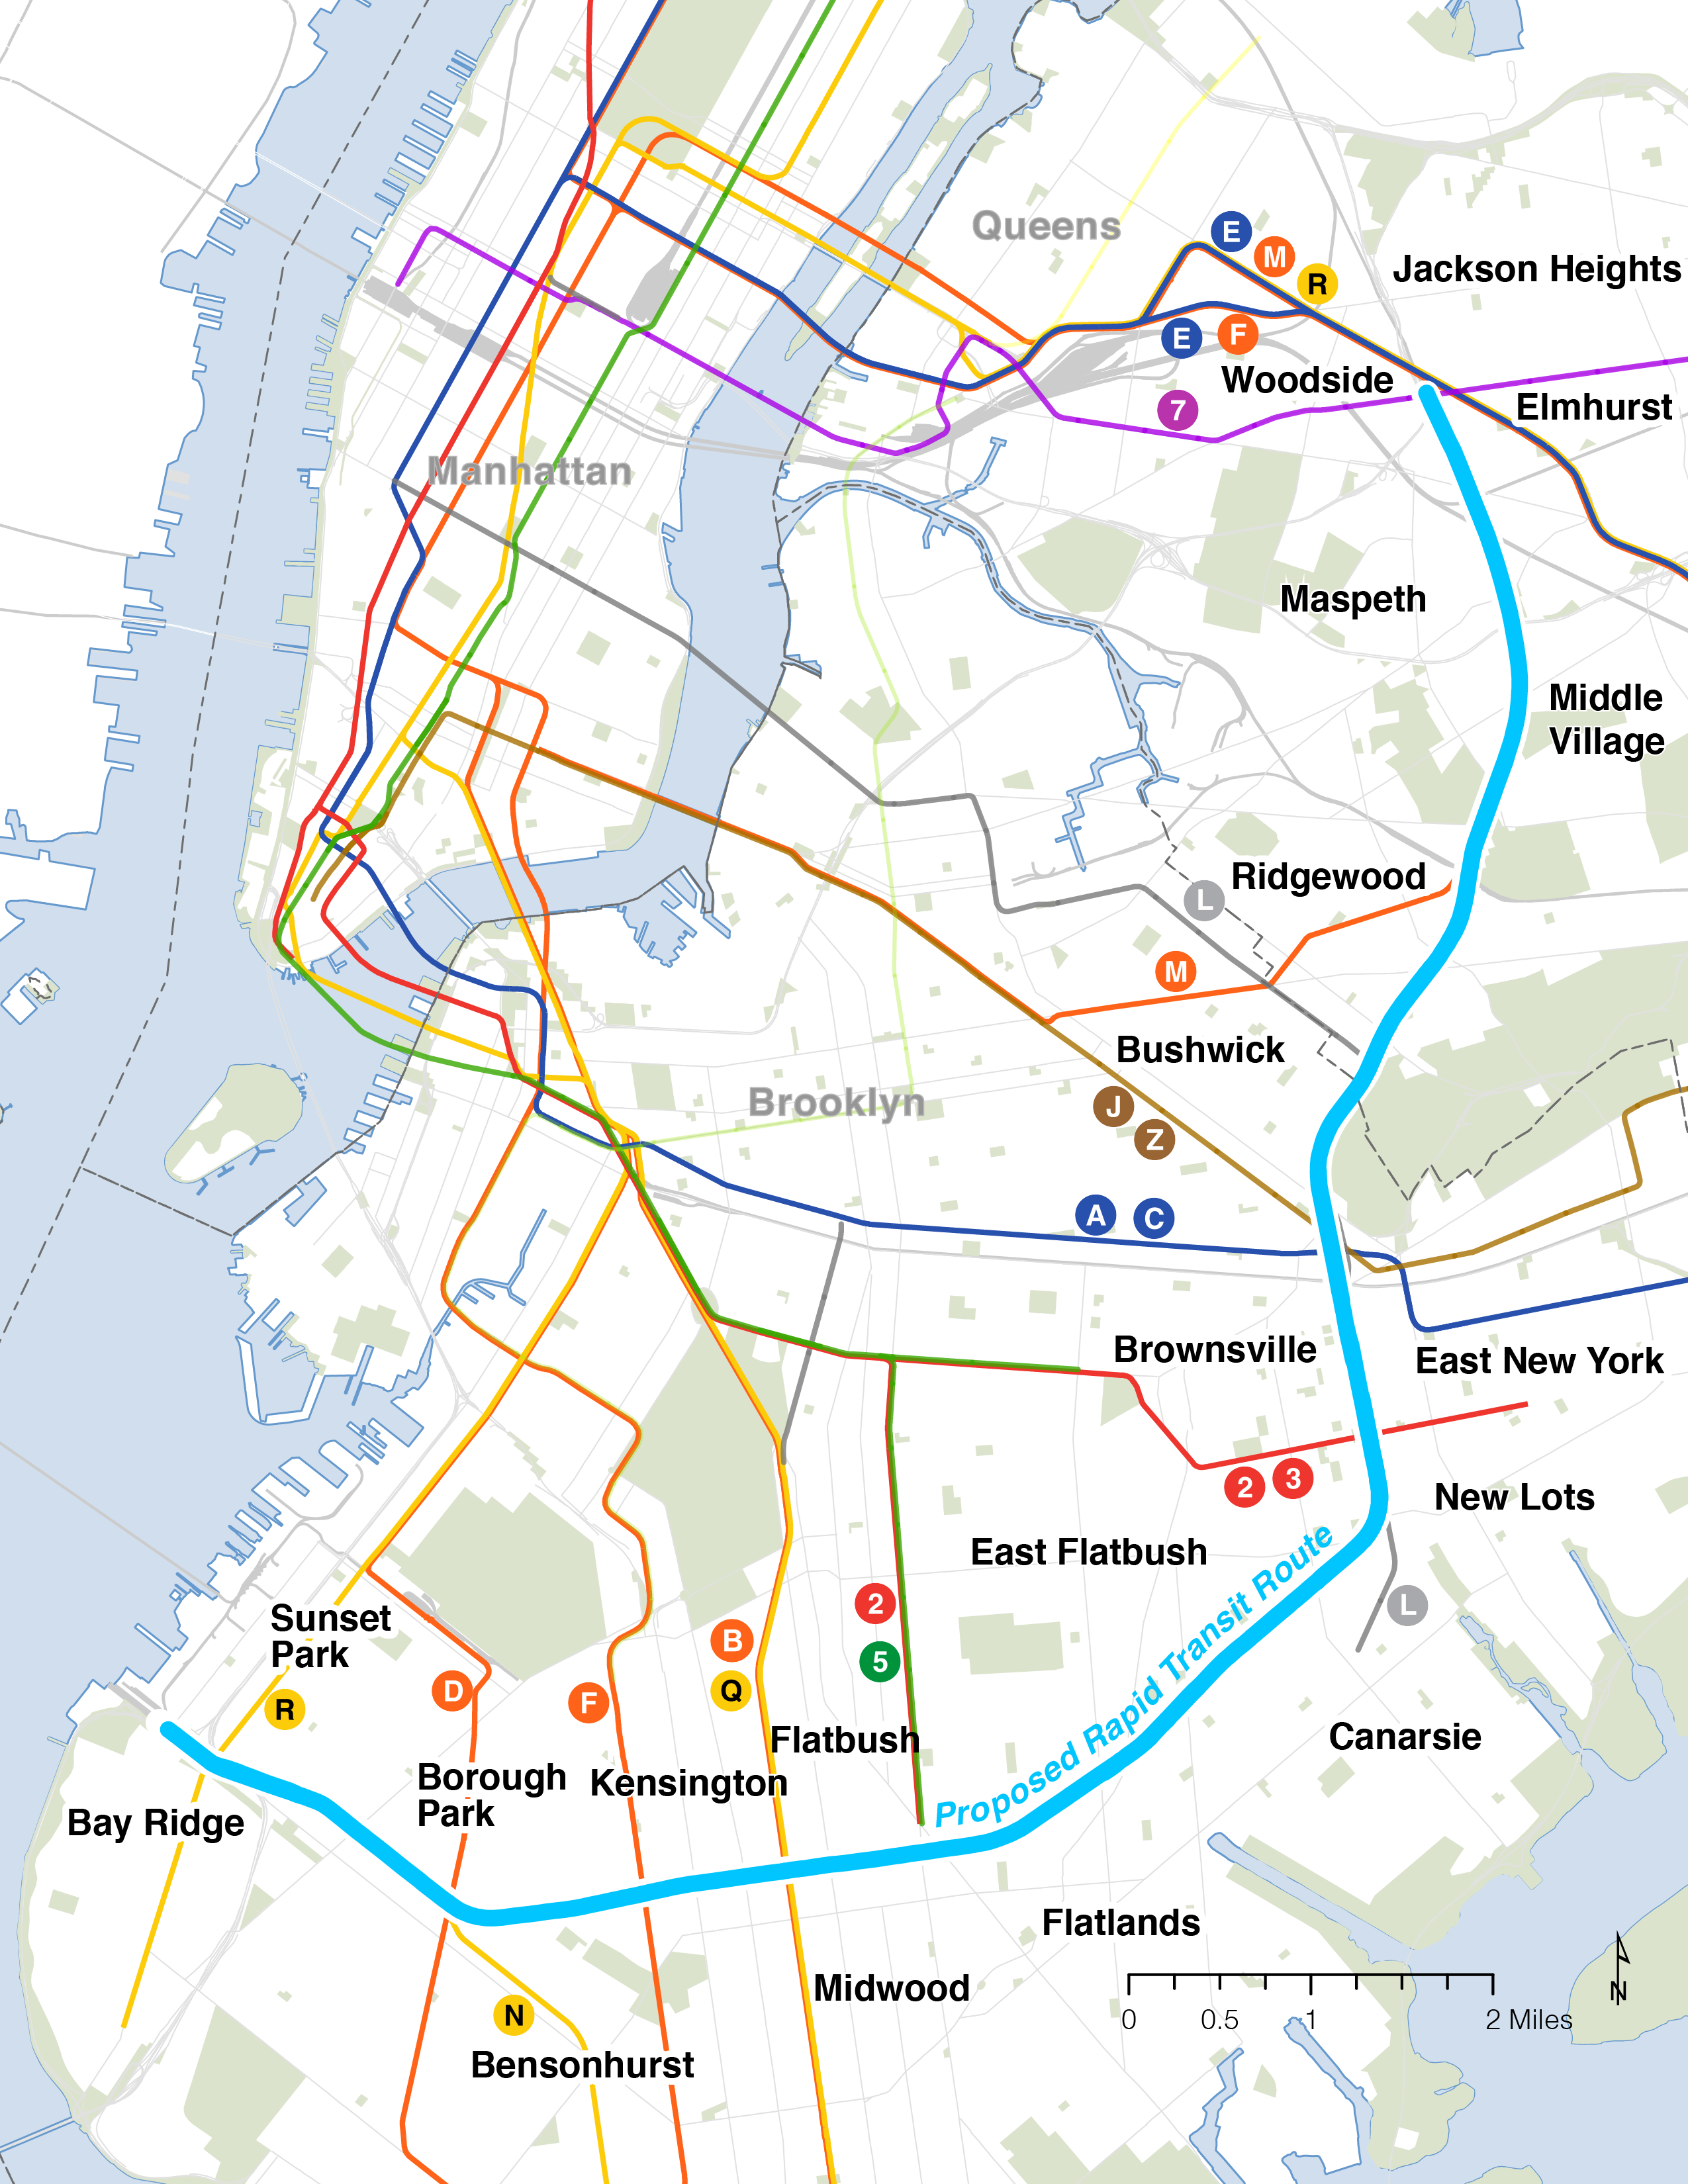 MTA to Hold Virtual Public Town Hall Meeting on Interborough Express 